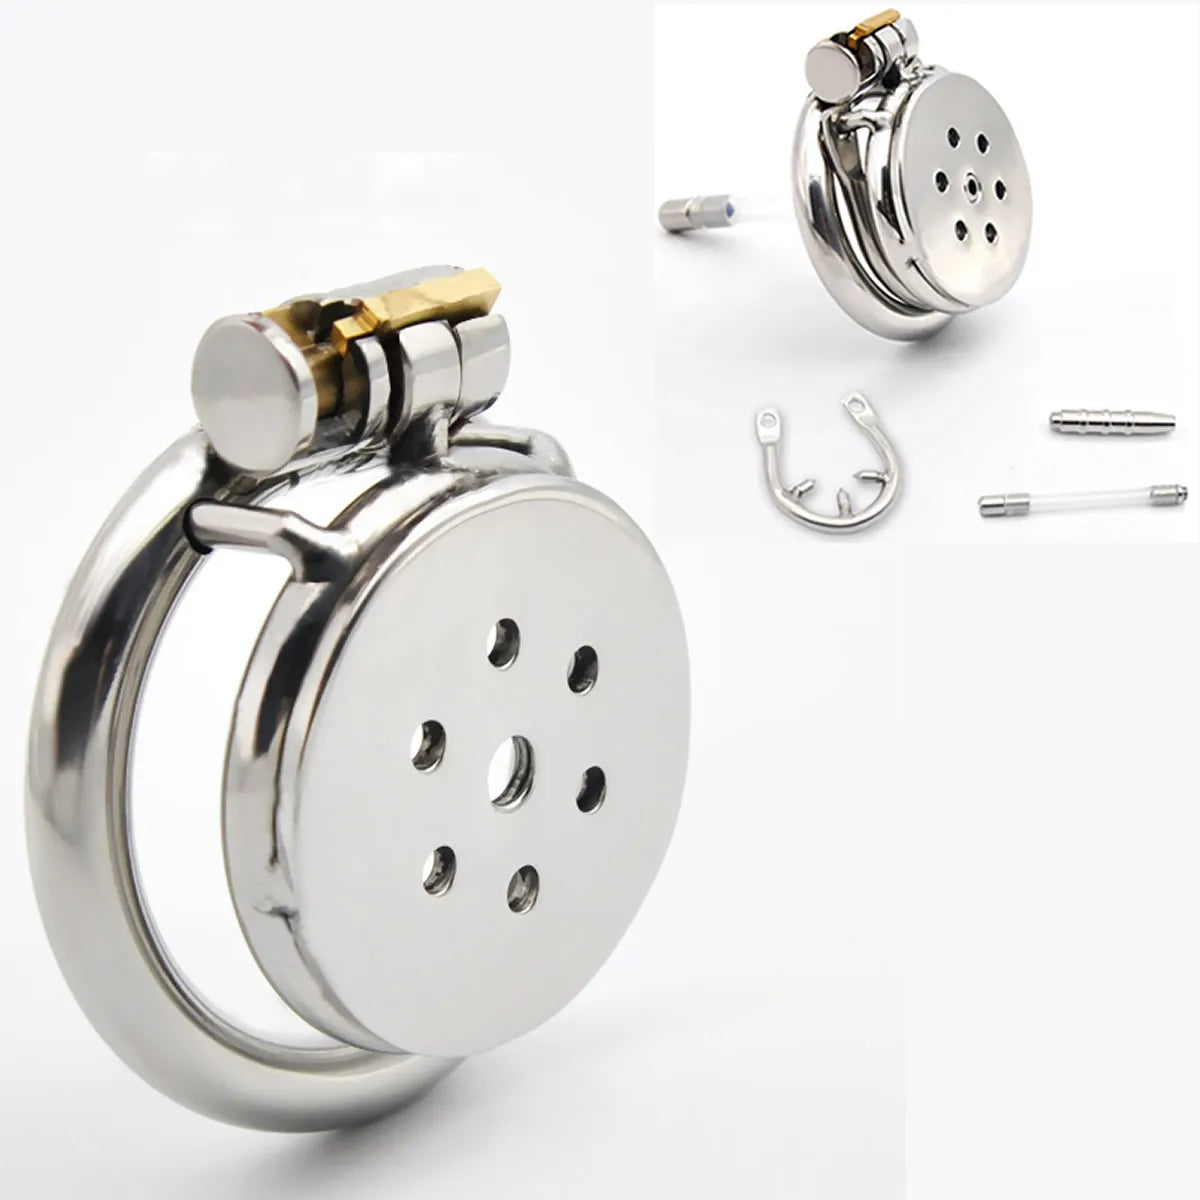 Male Slave Super Mini Chastity Cage Stainless Steel Penis Cage Cock Ring With Lock